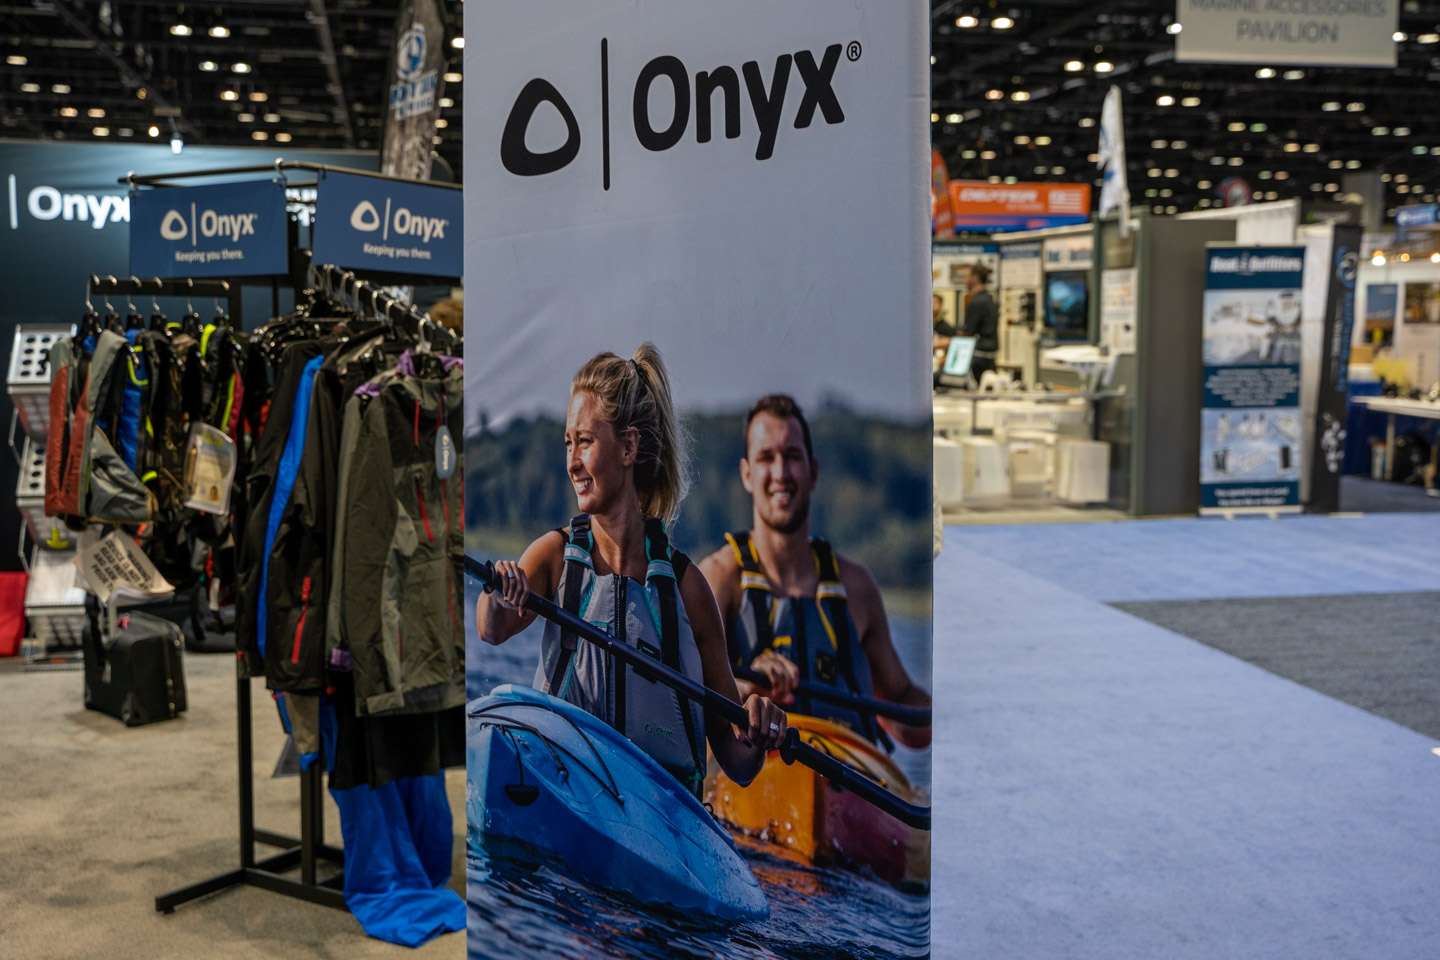 Onyx also offers life jackets designed specifically for kayak fisherman. 